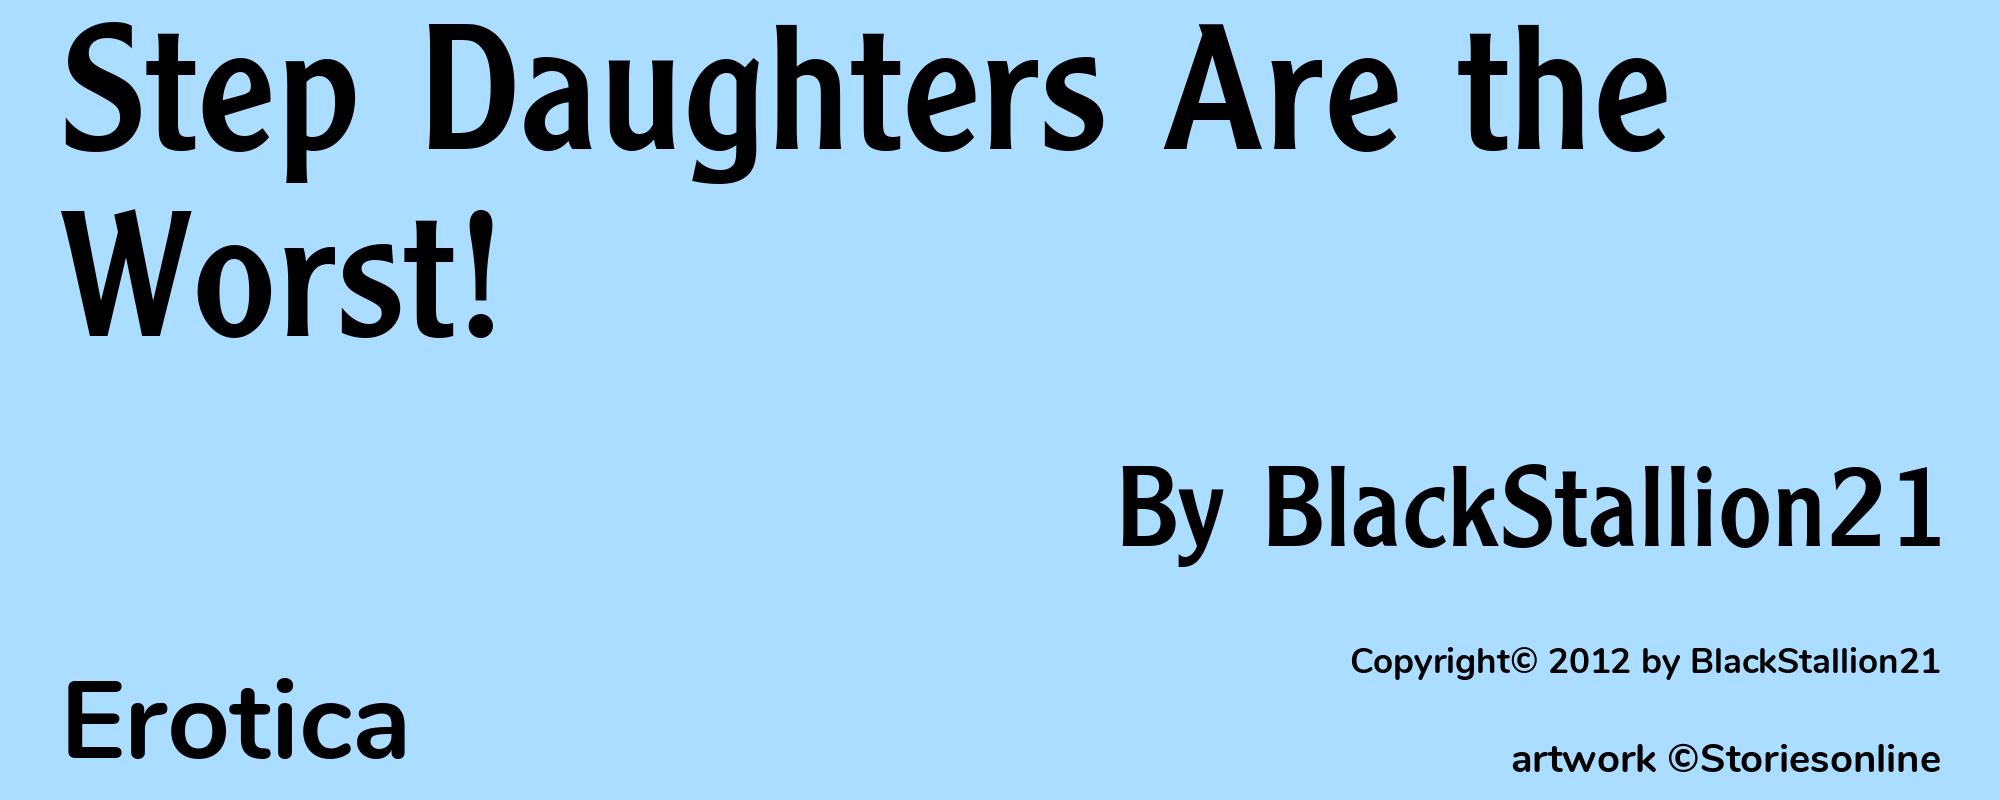 Step Daughters Are the Worst! - Cover